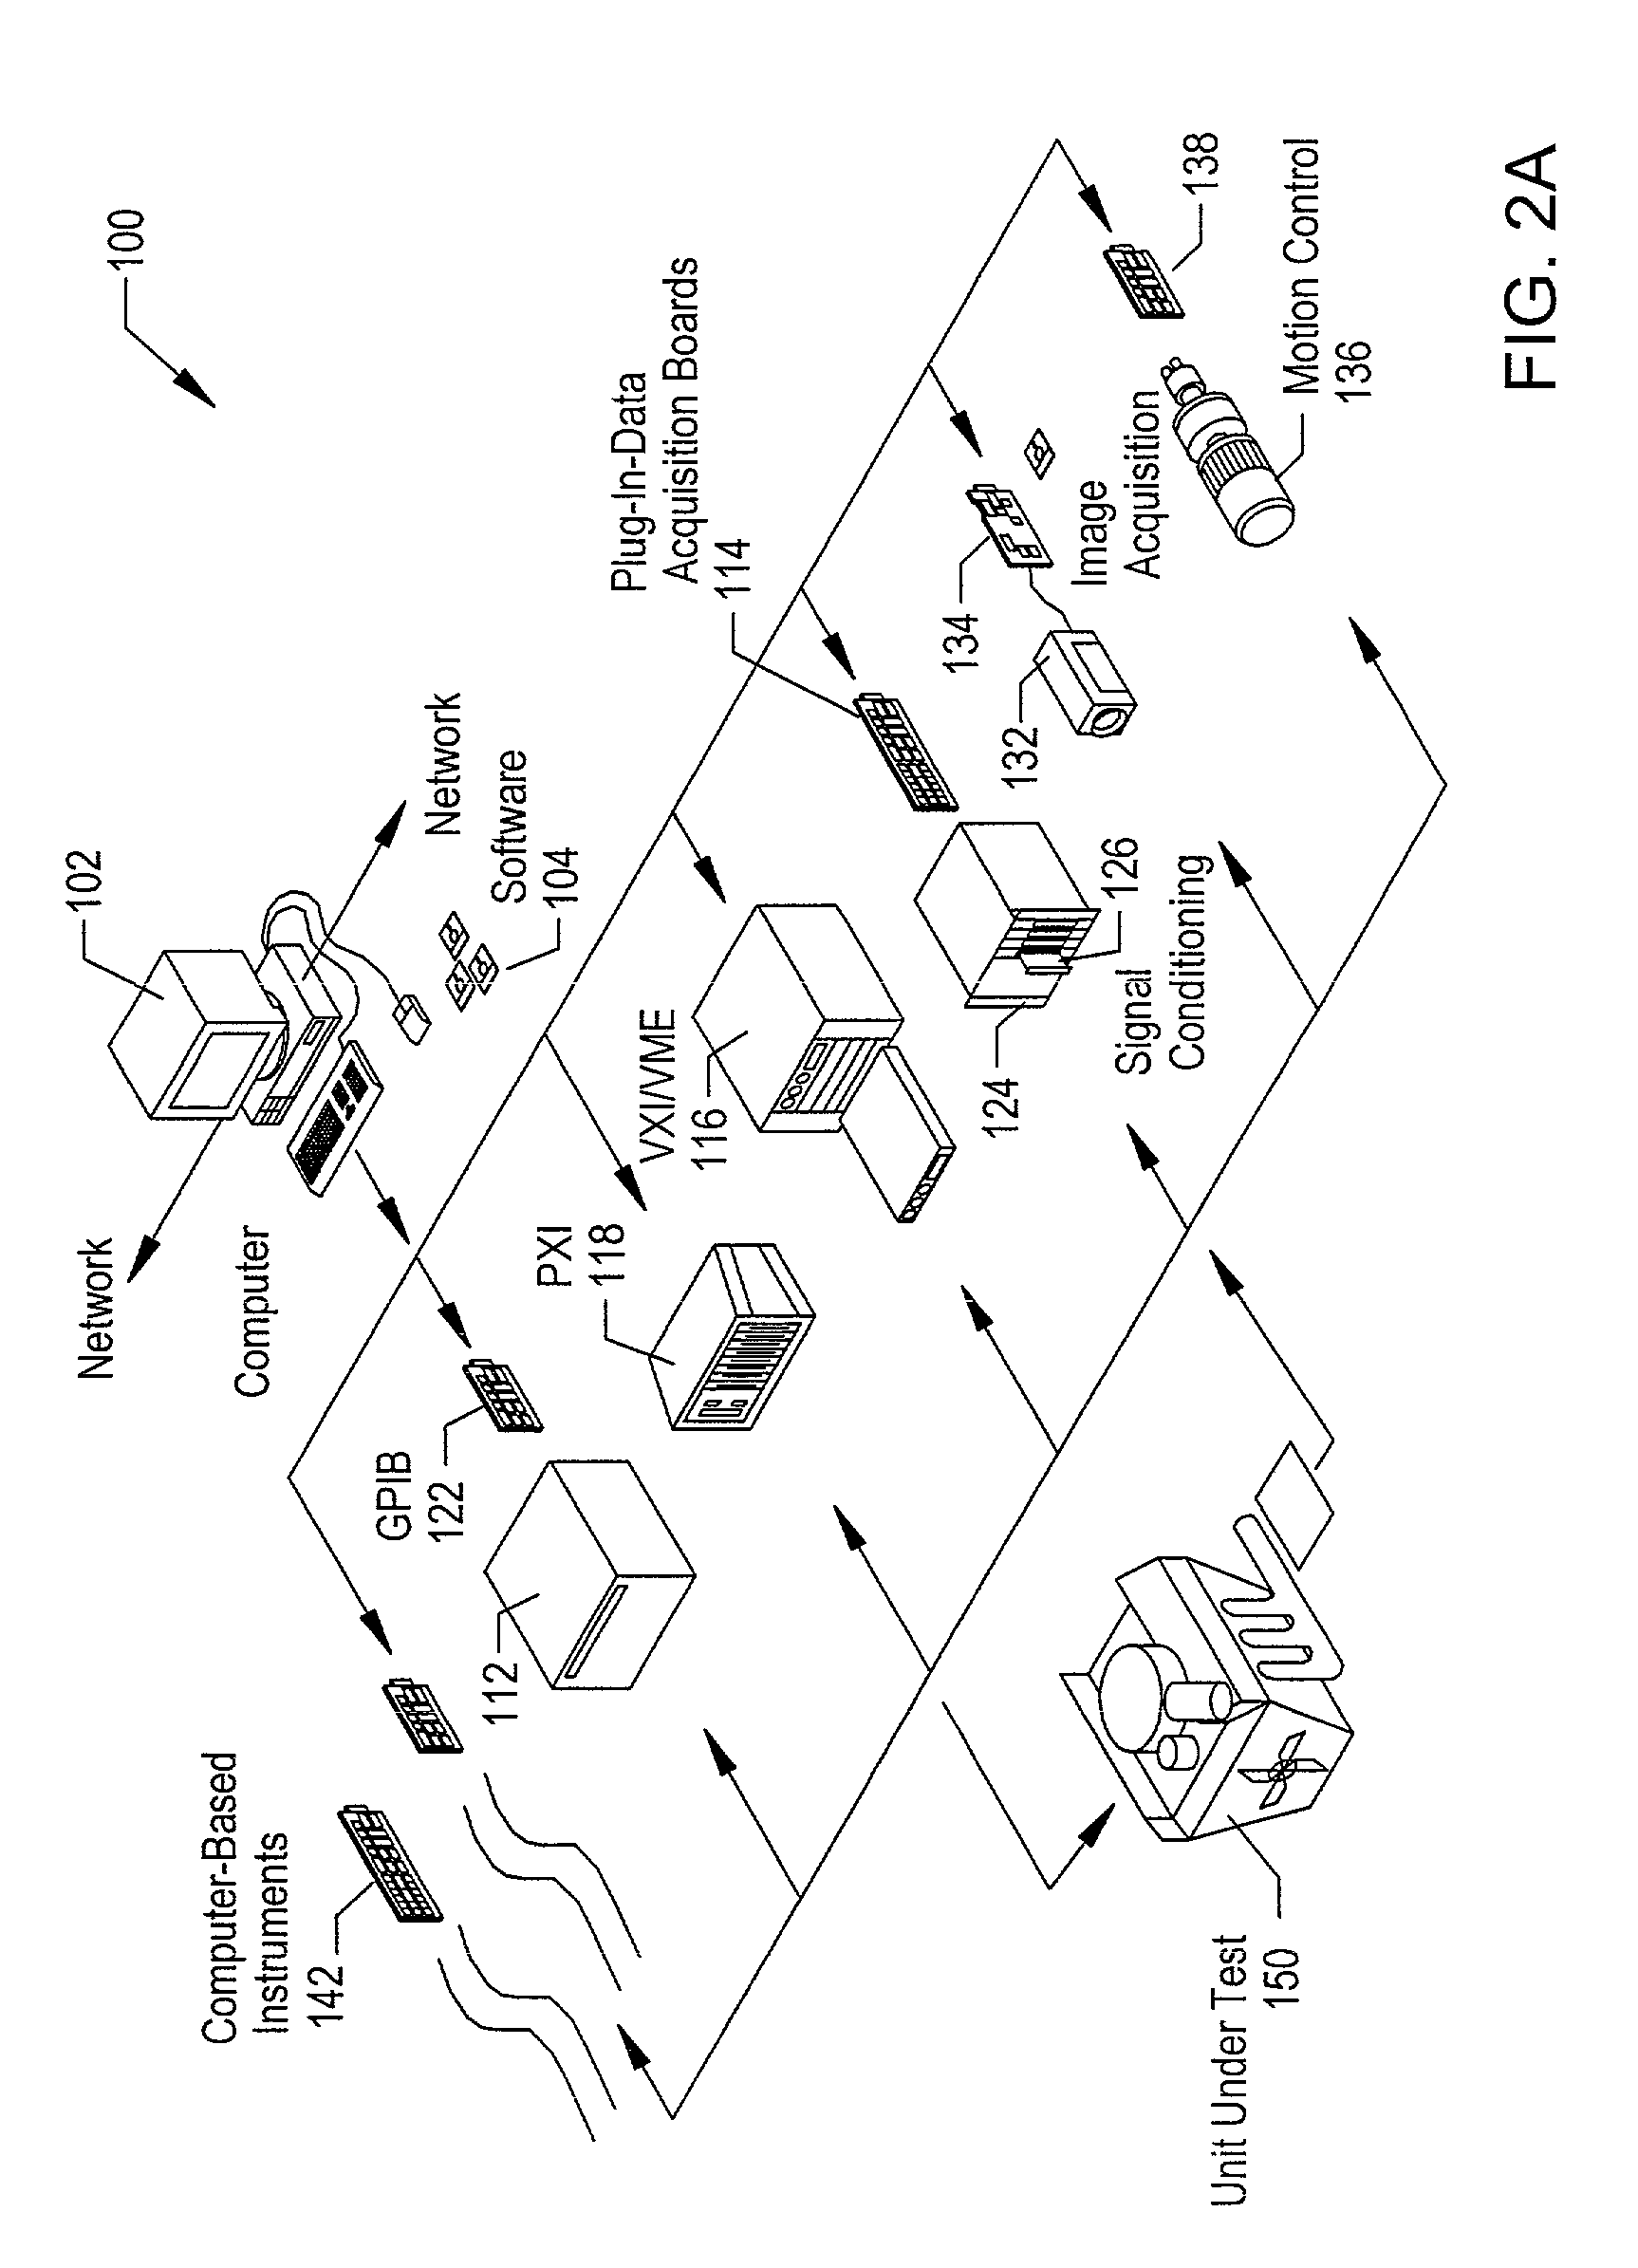 System and method for performing rapid control prototyping using a plurality of graphical programs that share a single graphical user interface